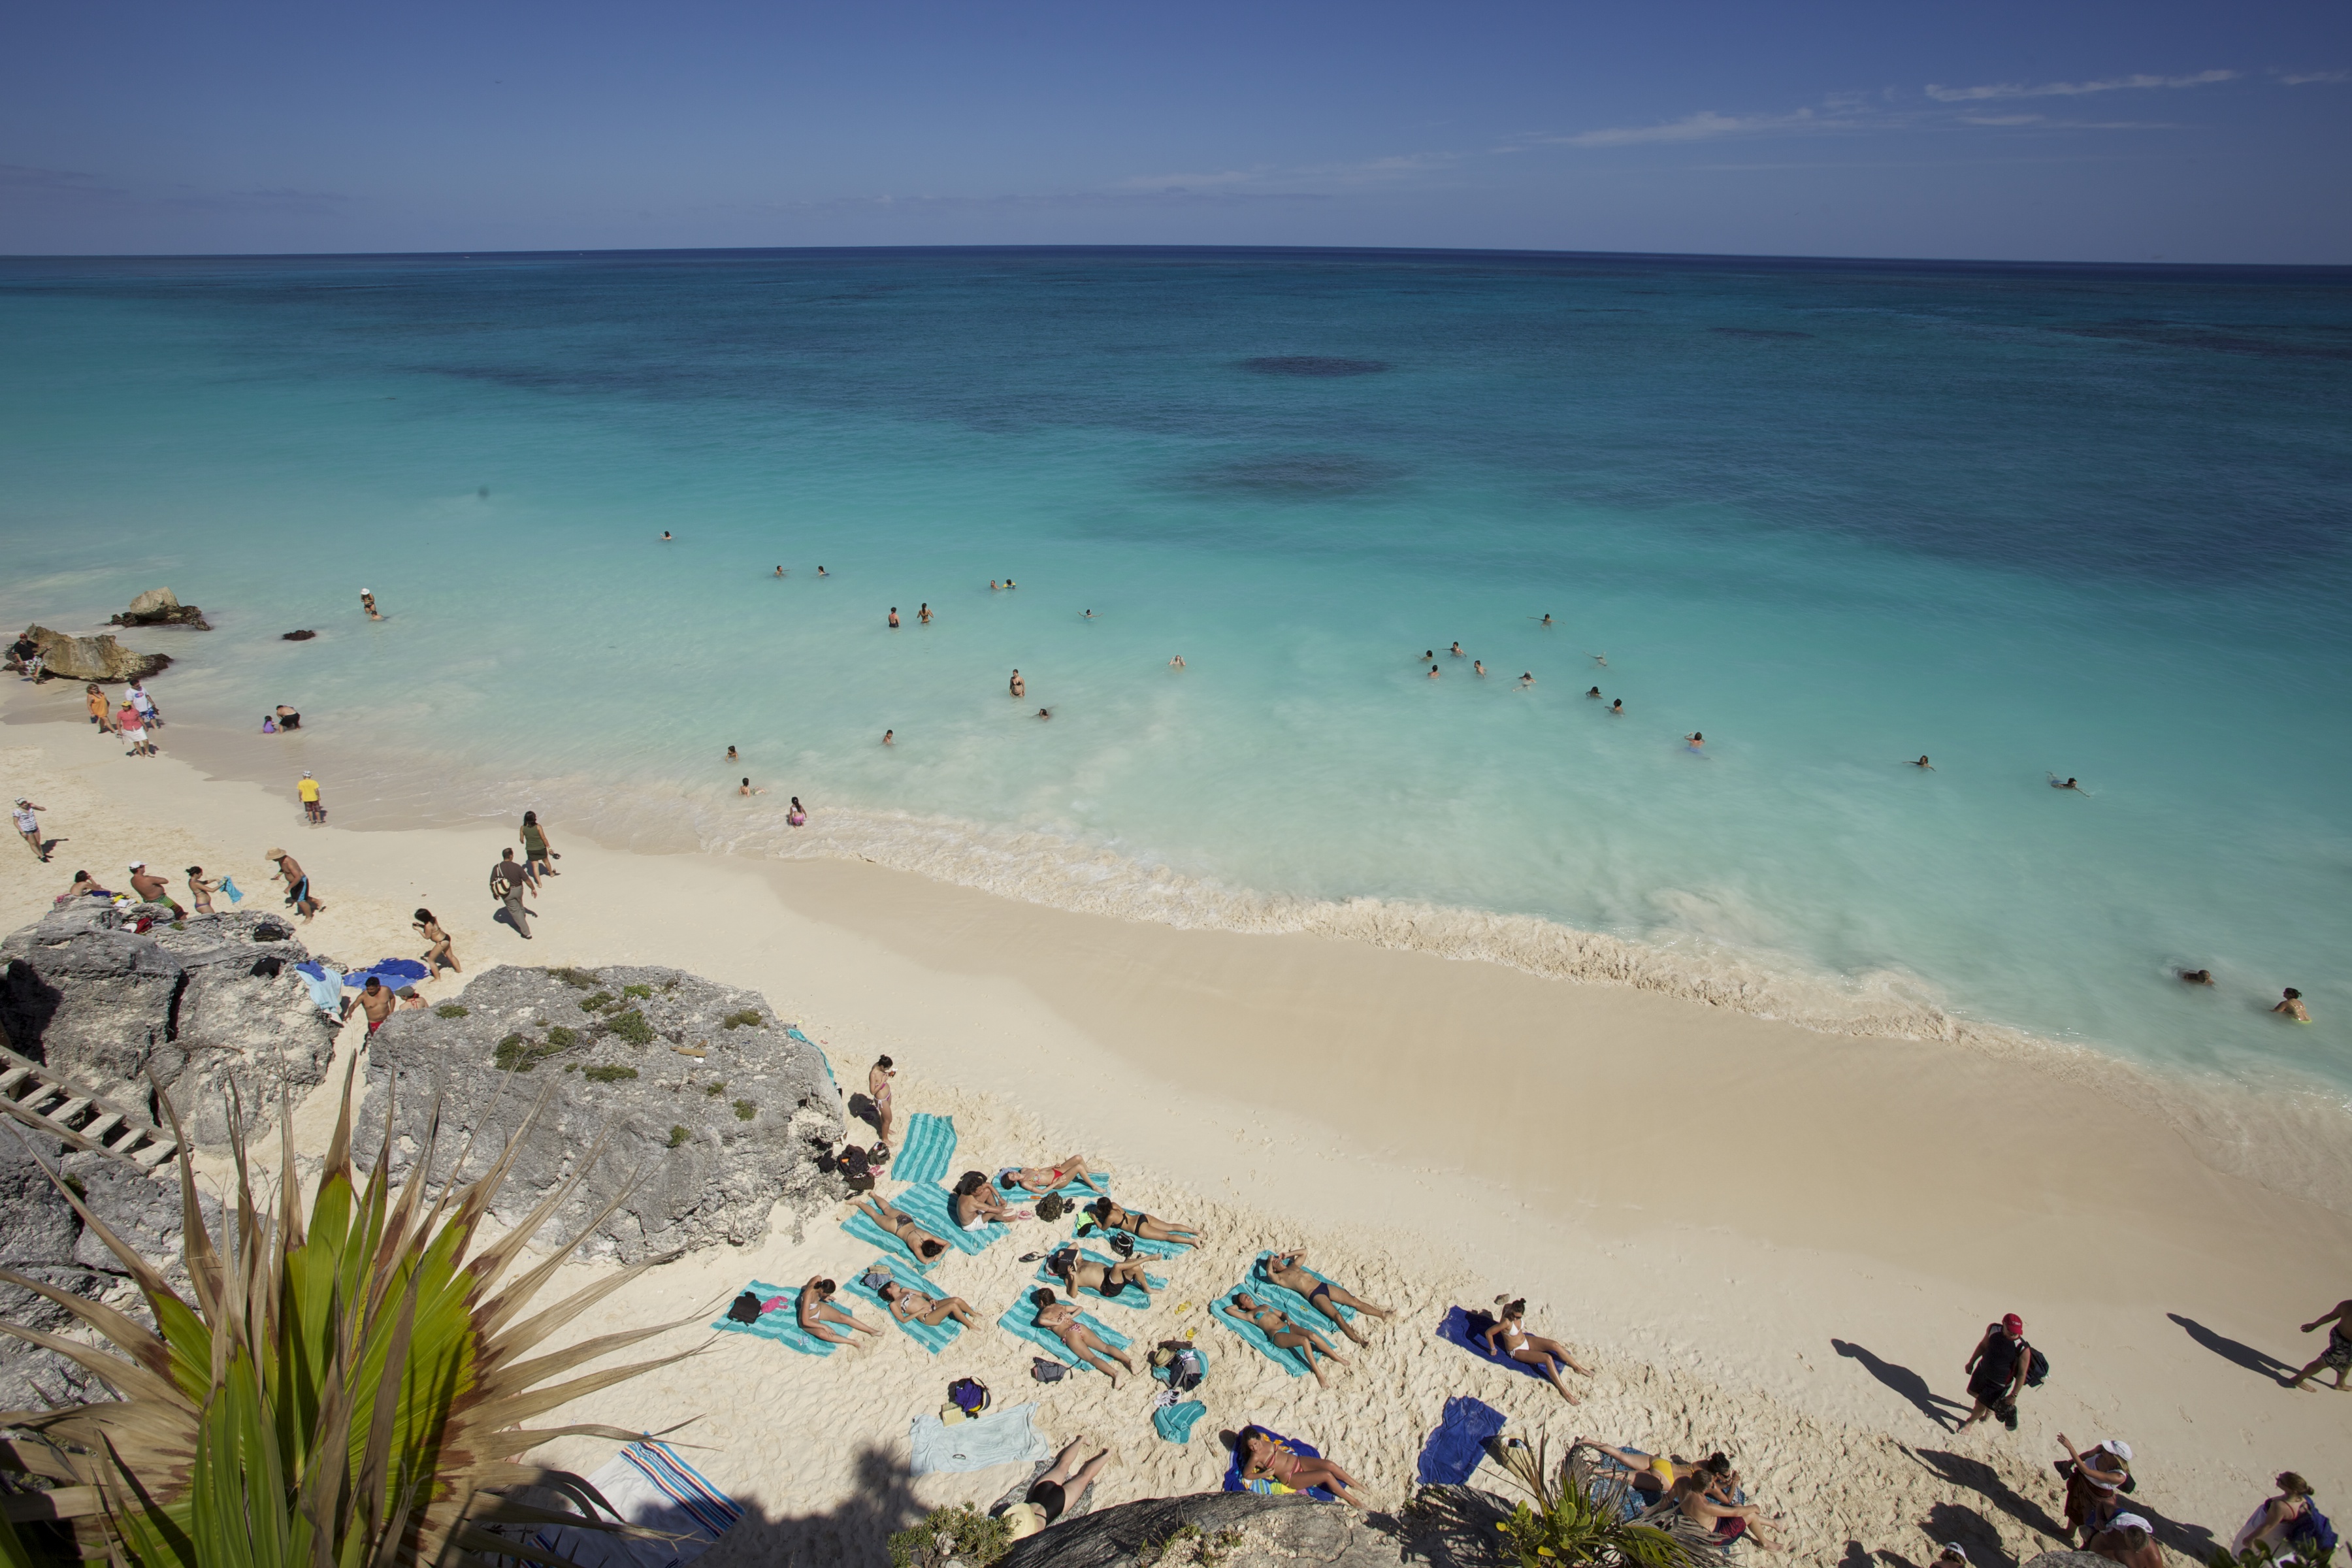 Arthur Frommer: Quintana Roo, Mexico, is Gaining as a Popular Tourist Destination | Frommer's